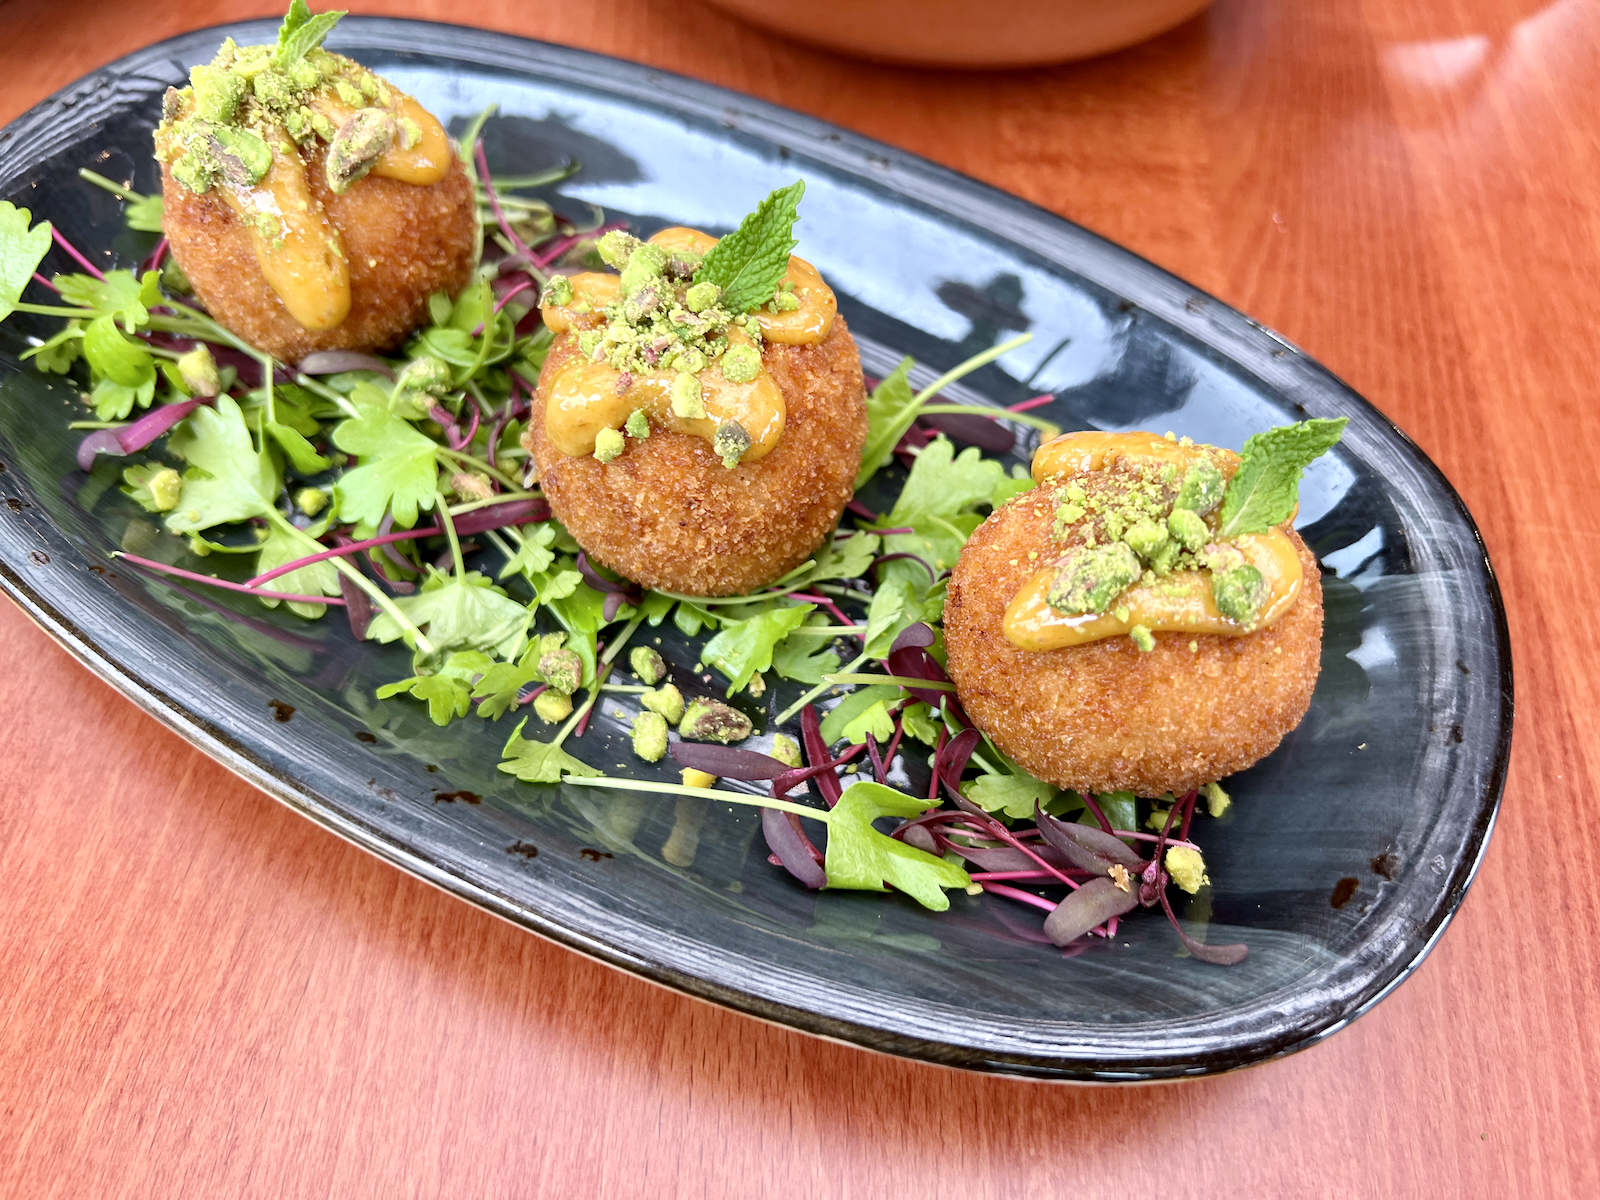 Pistachio chicken spheres at Lebnani House